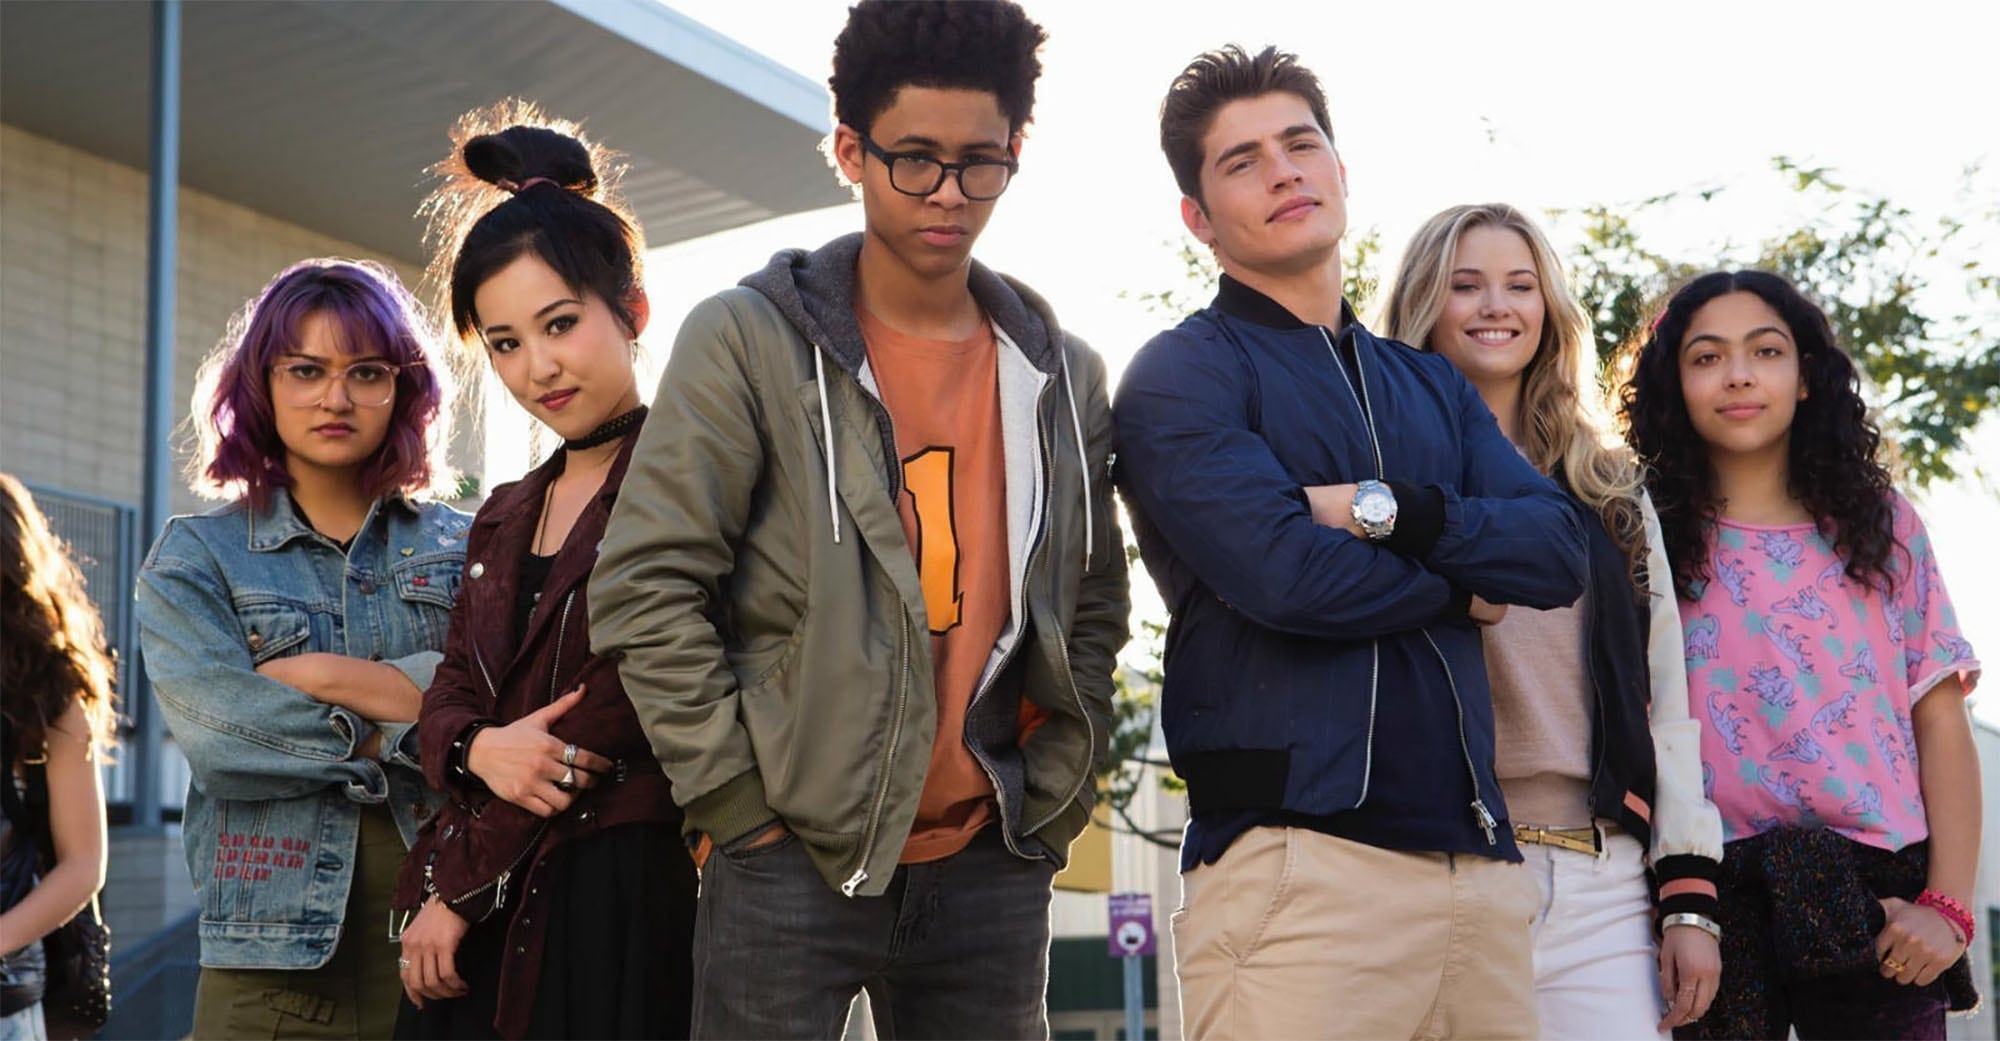 Marvel's ‘Runaways’ cast fell short of other modern superhero shows. Here are the biggest reasons why.